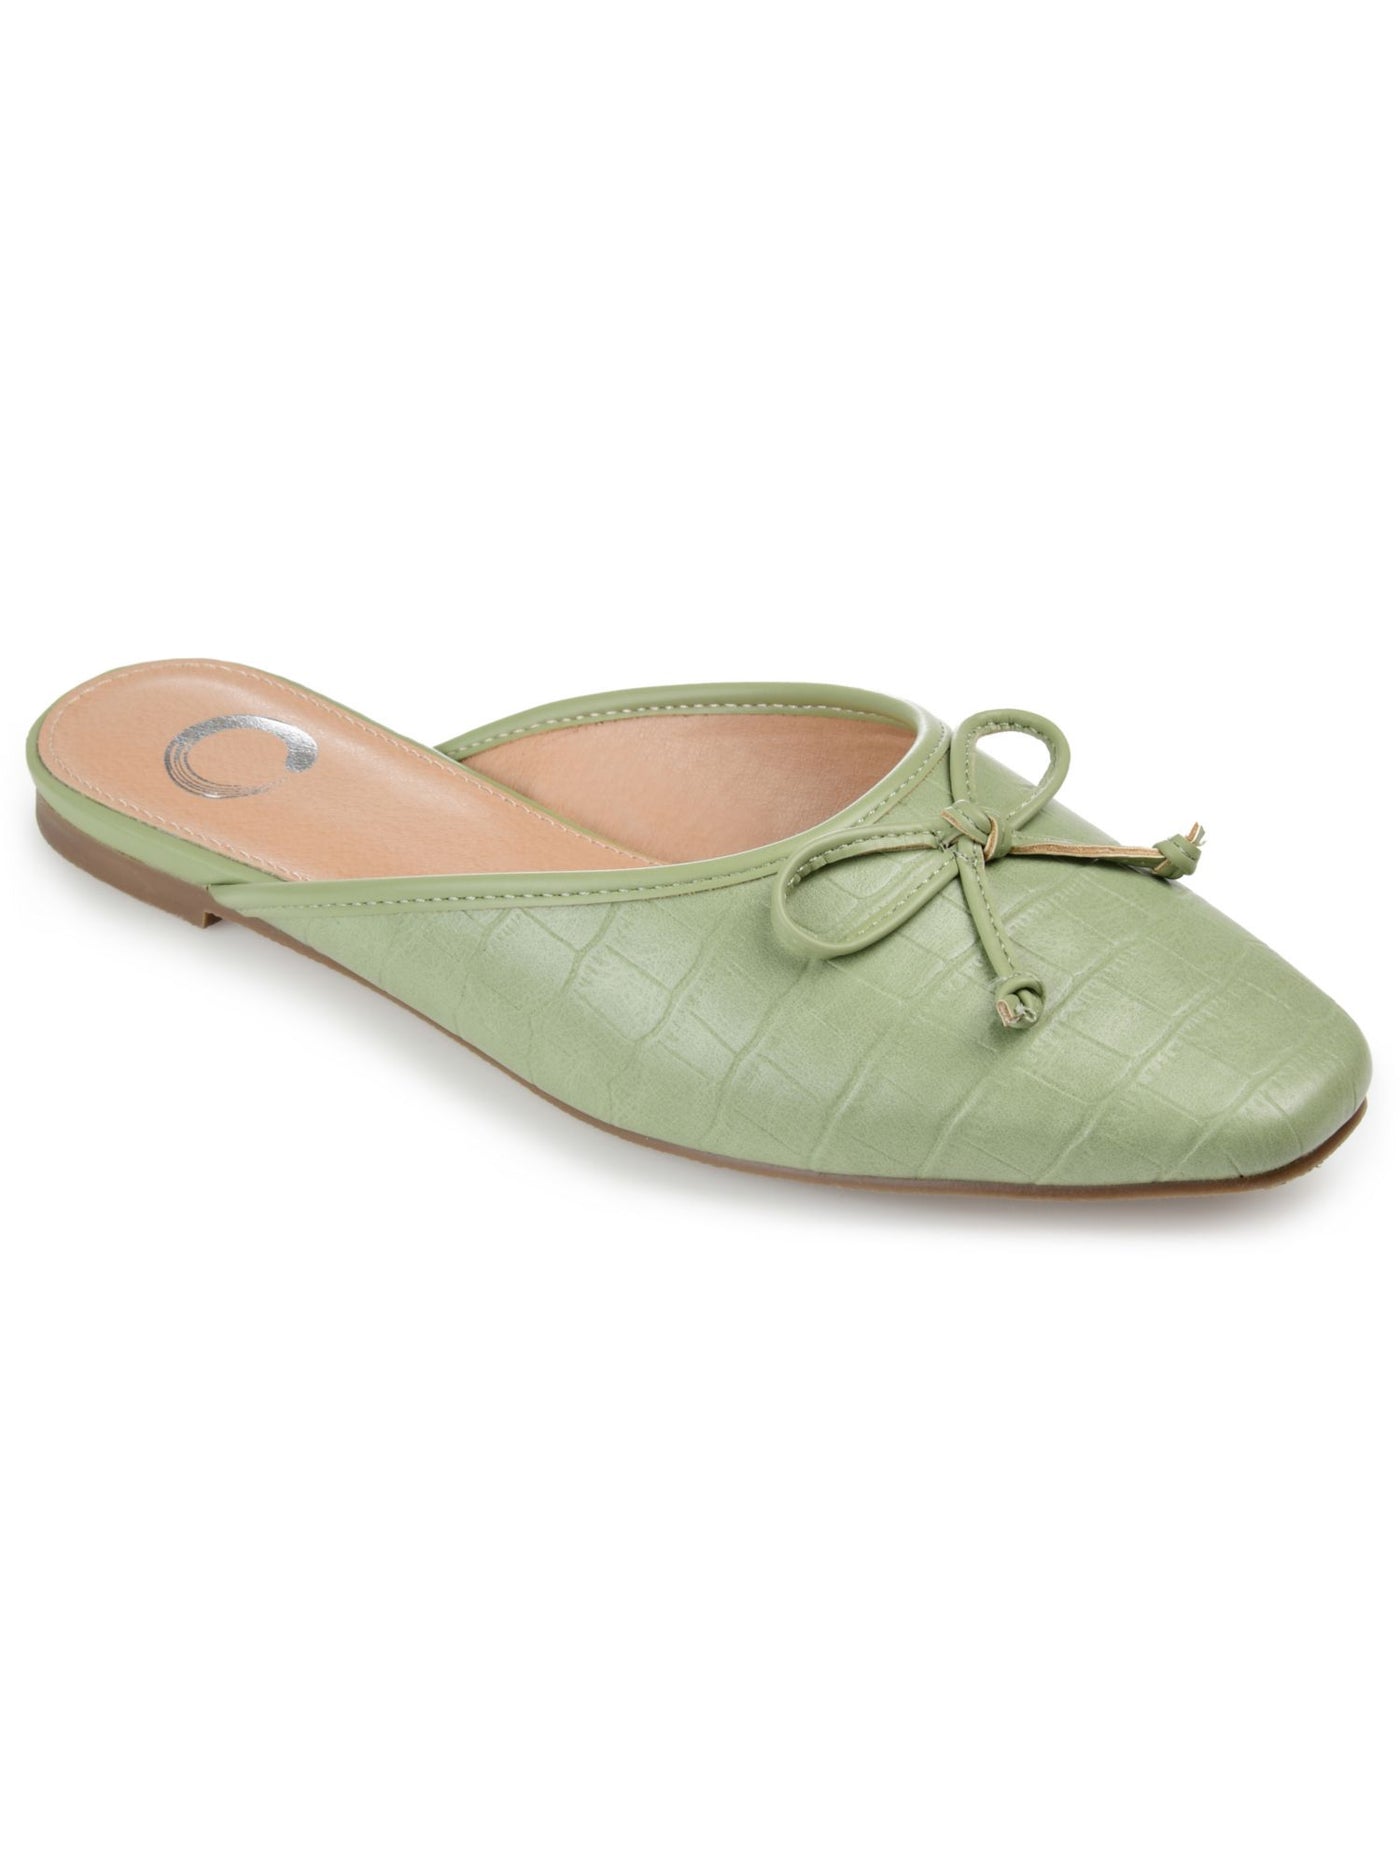 JOURNEE COLLECTION Womens Green Croc Textured Bow Accent Padded Tammala Square Toe Slip On Mules 7 M